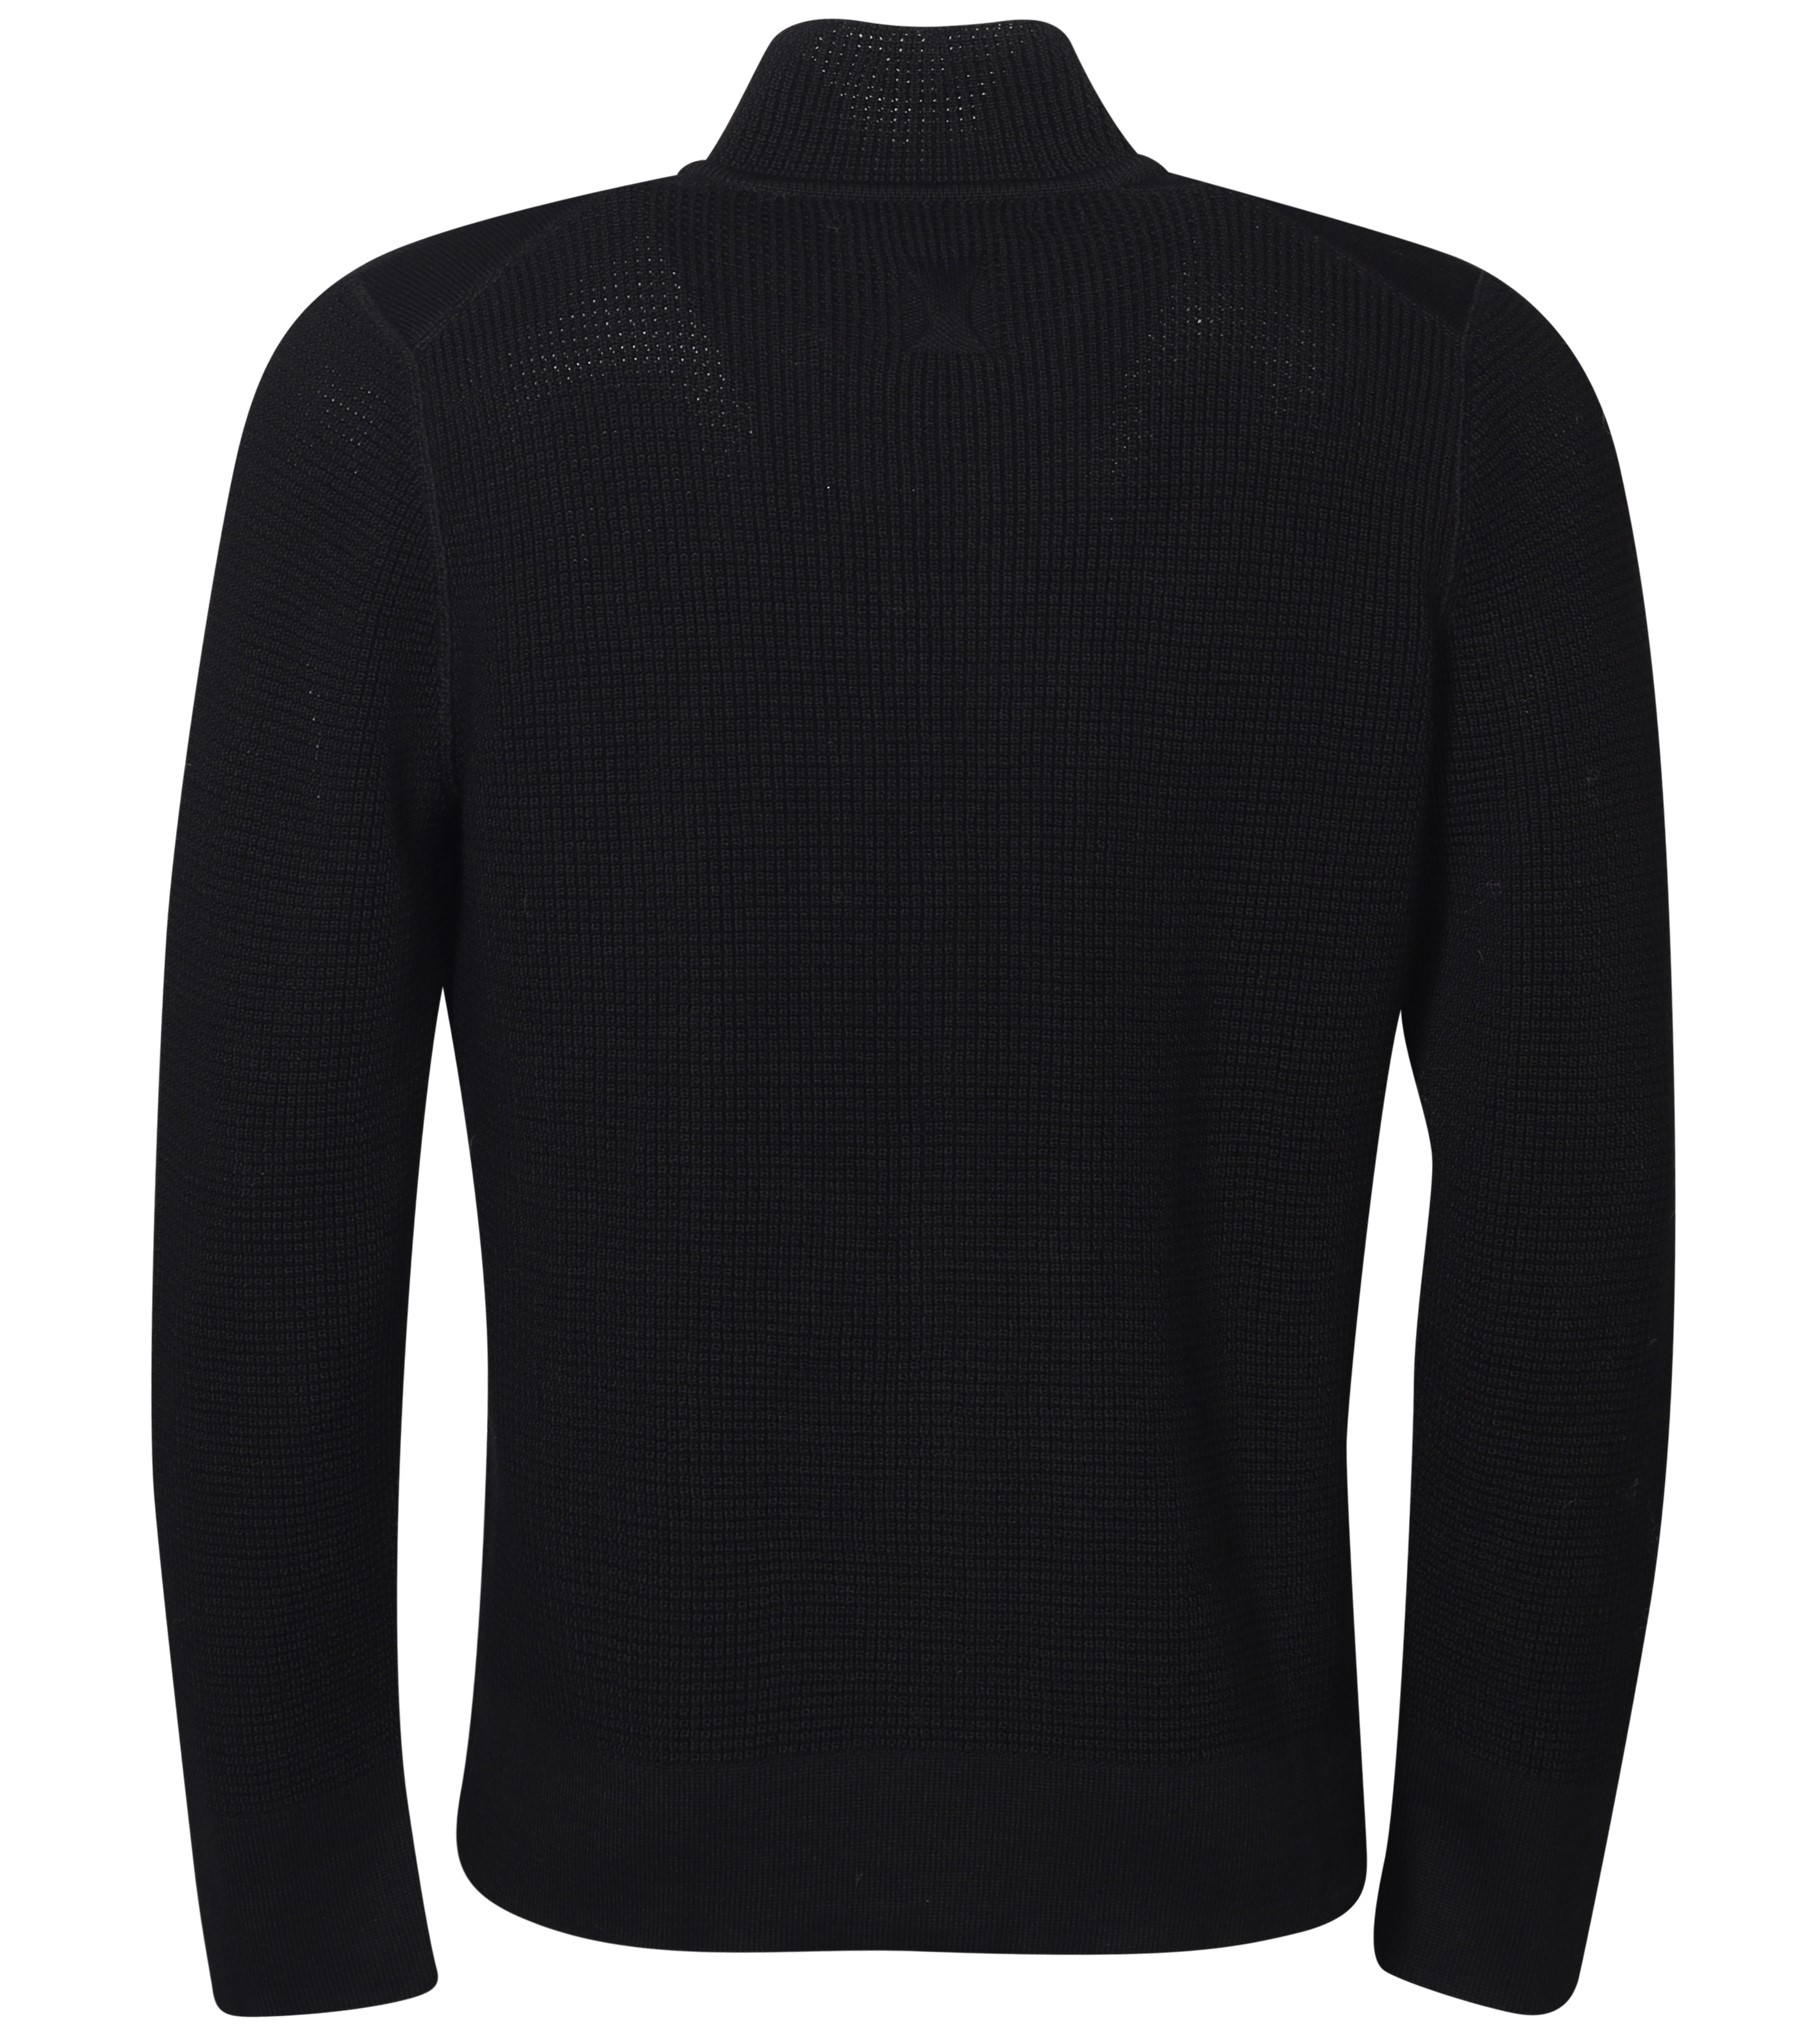 HANNES ROETHER Knit Zip Pullover in Black